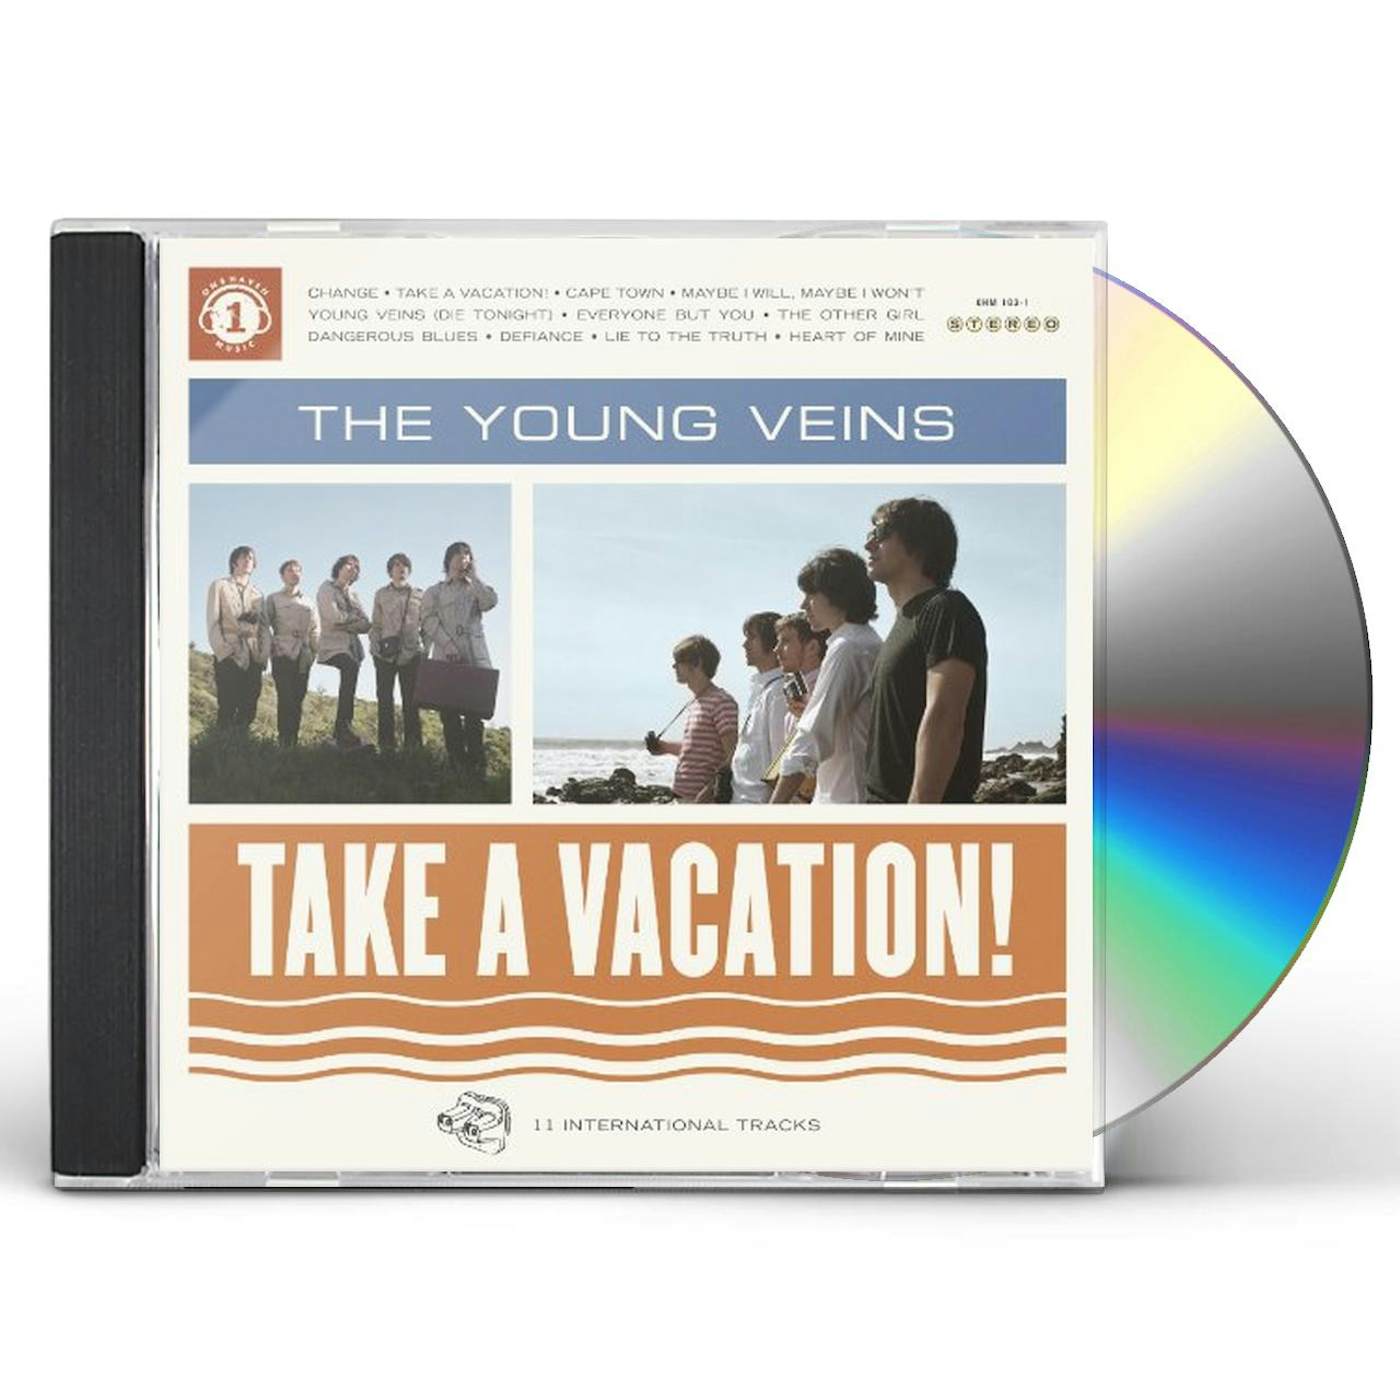 The Young Veins TAKE A VACATION CD